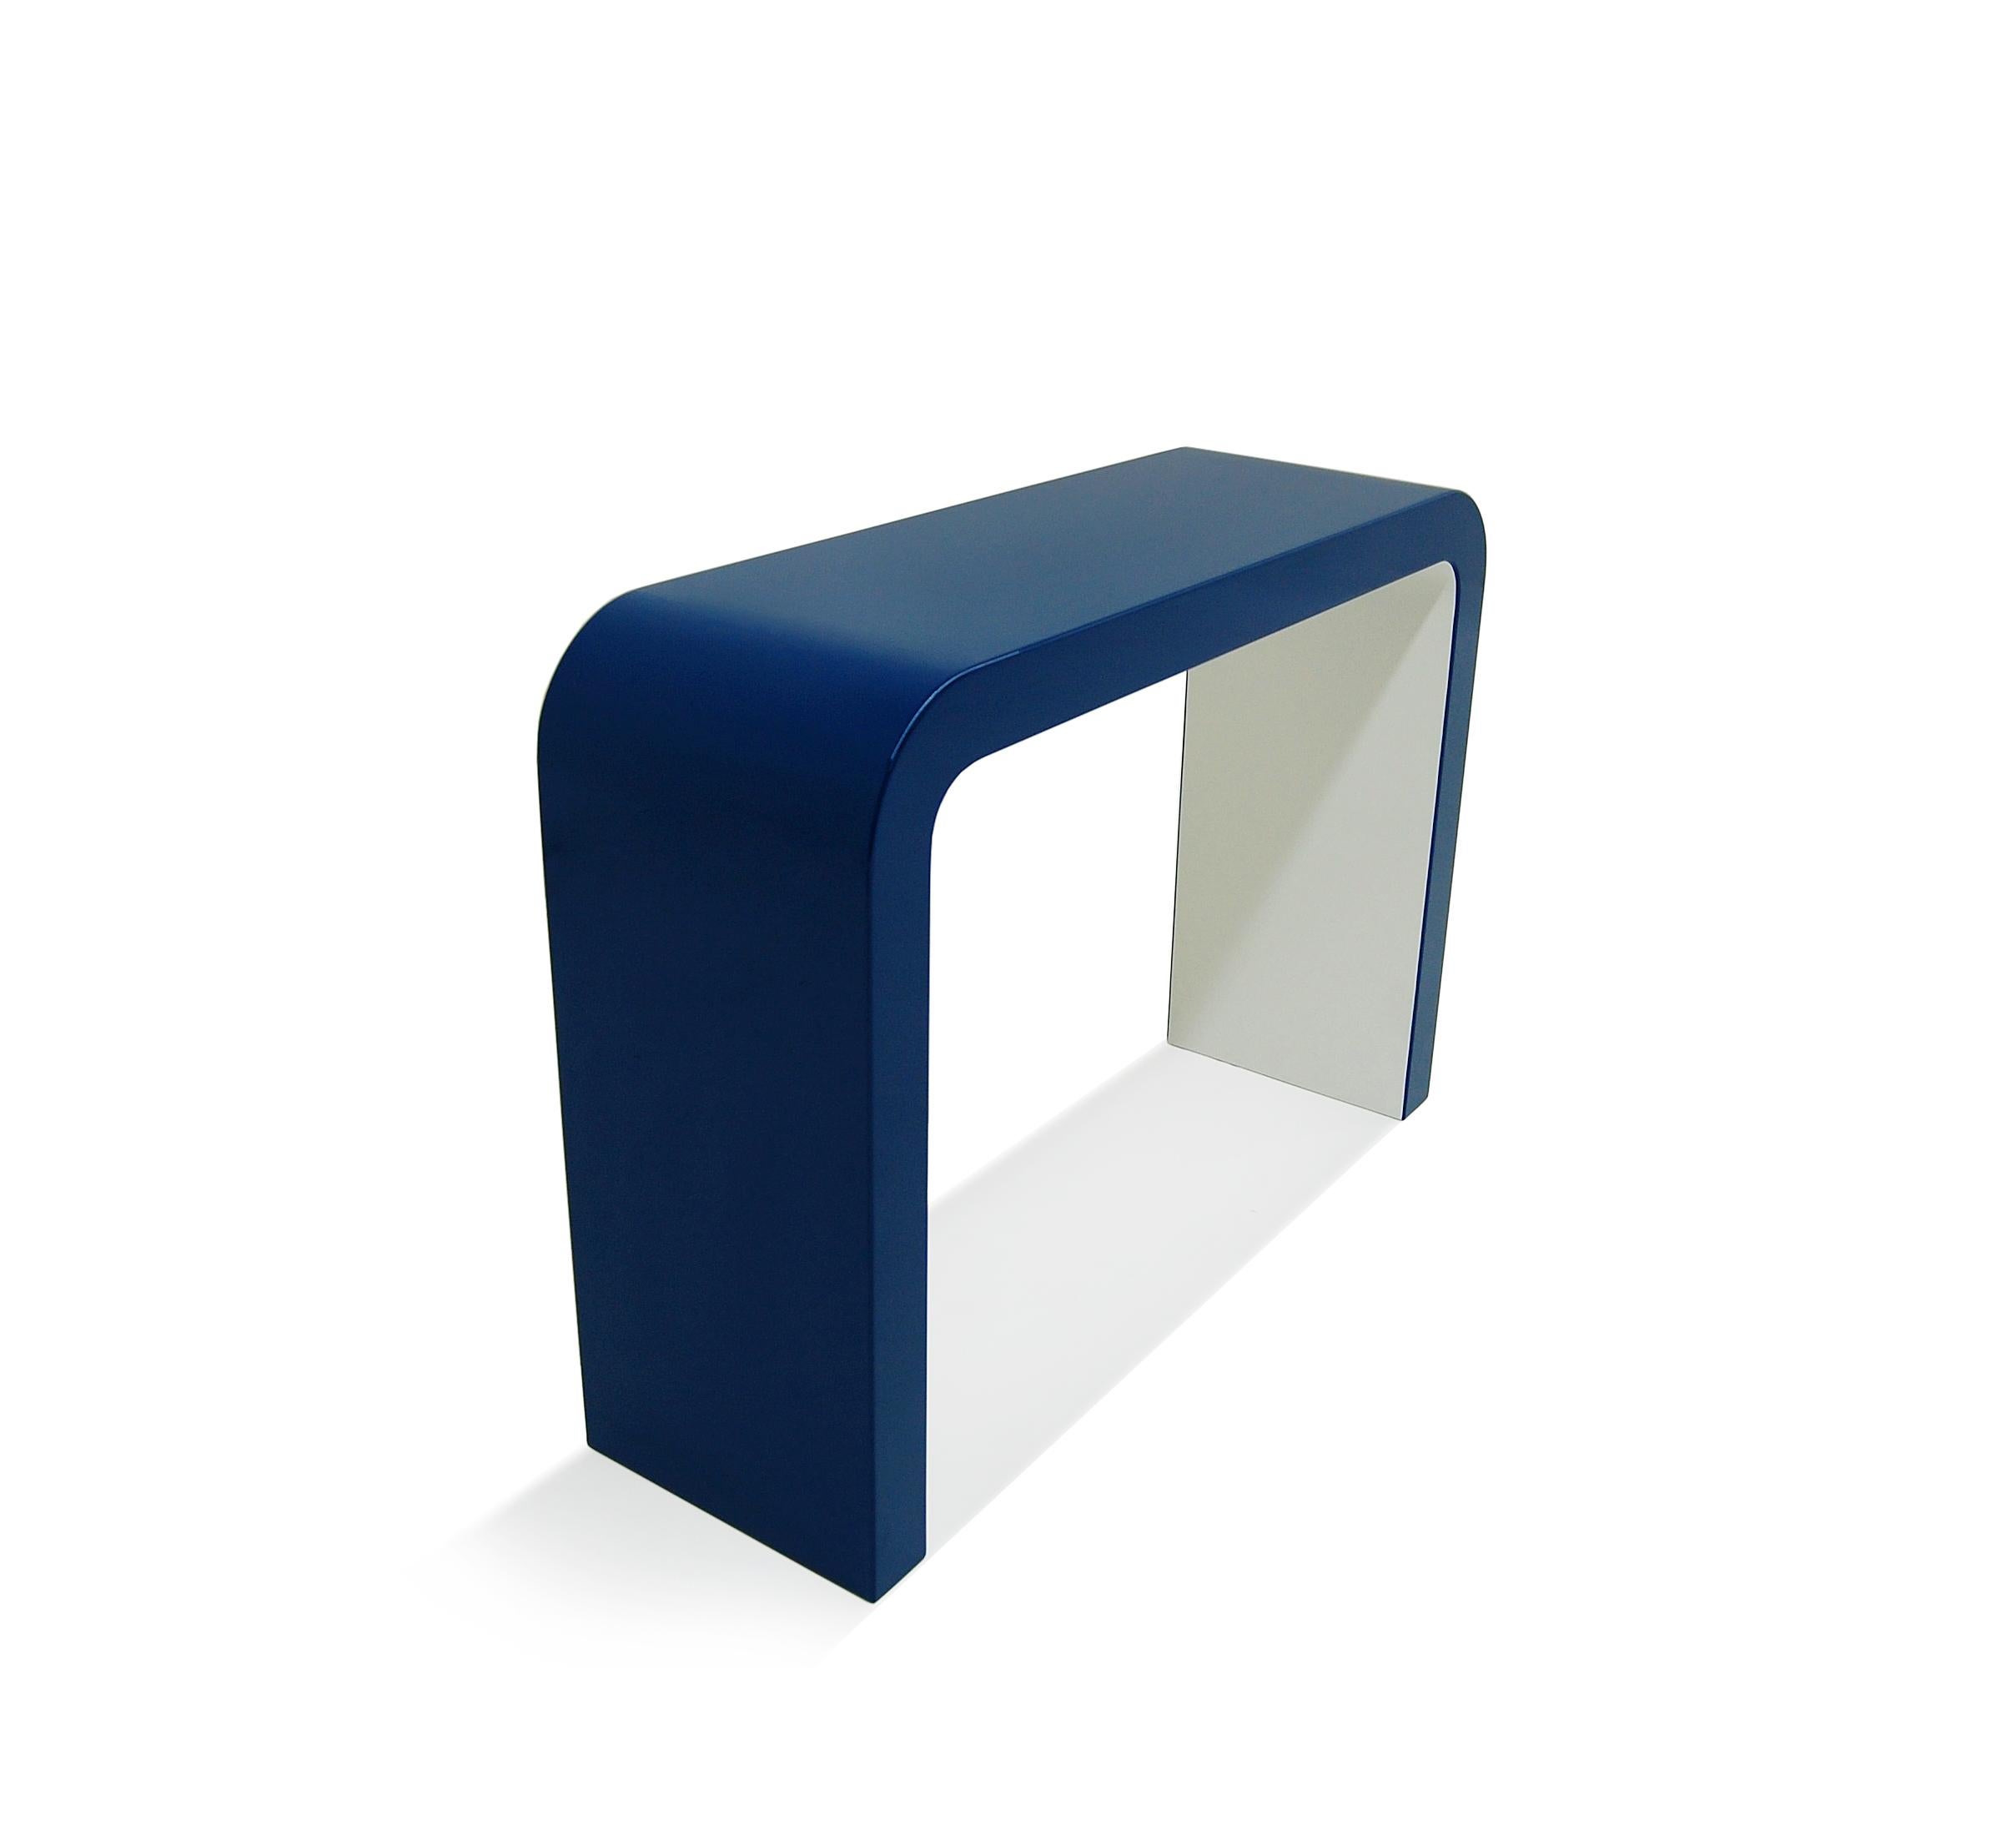 Soho Console Rounded Corners Blue White lacquered  In New Condition For Sale In Ridgewood, NY